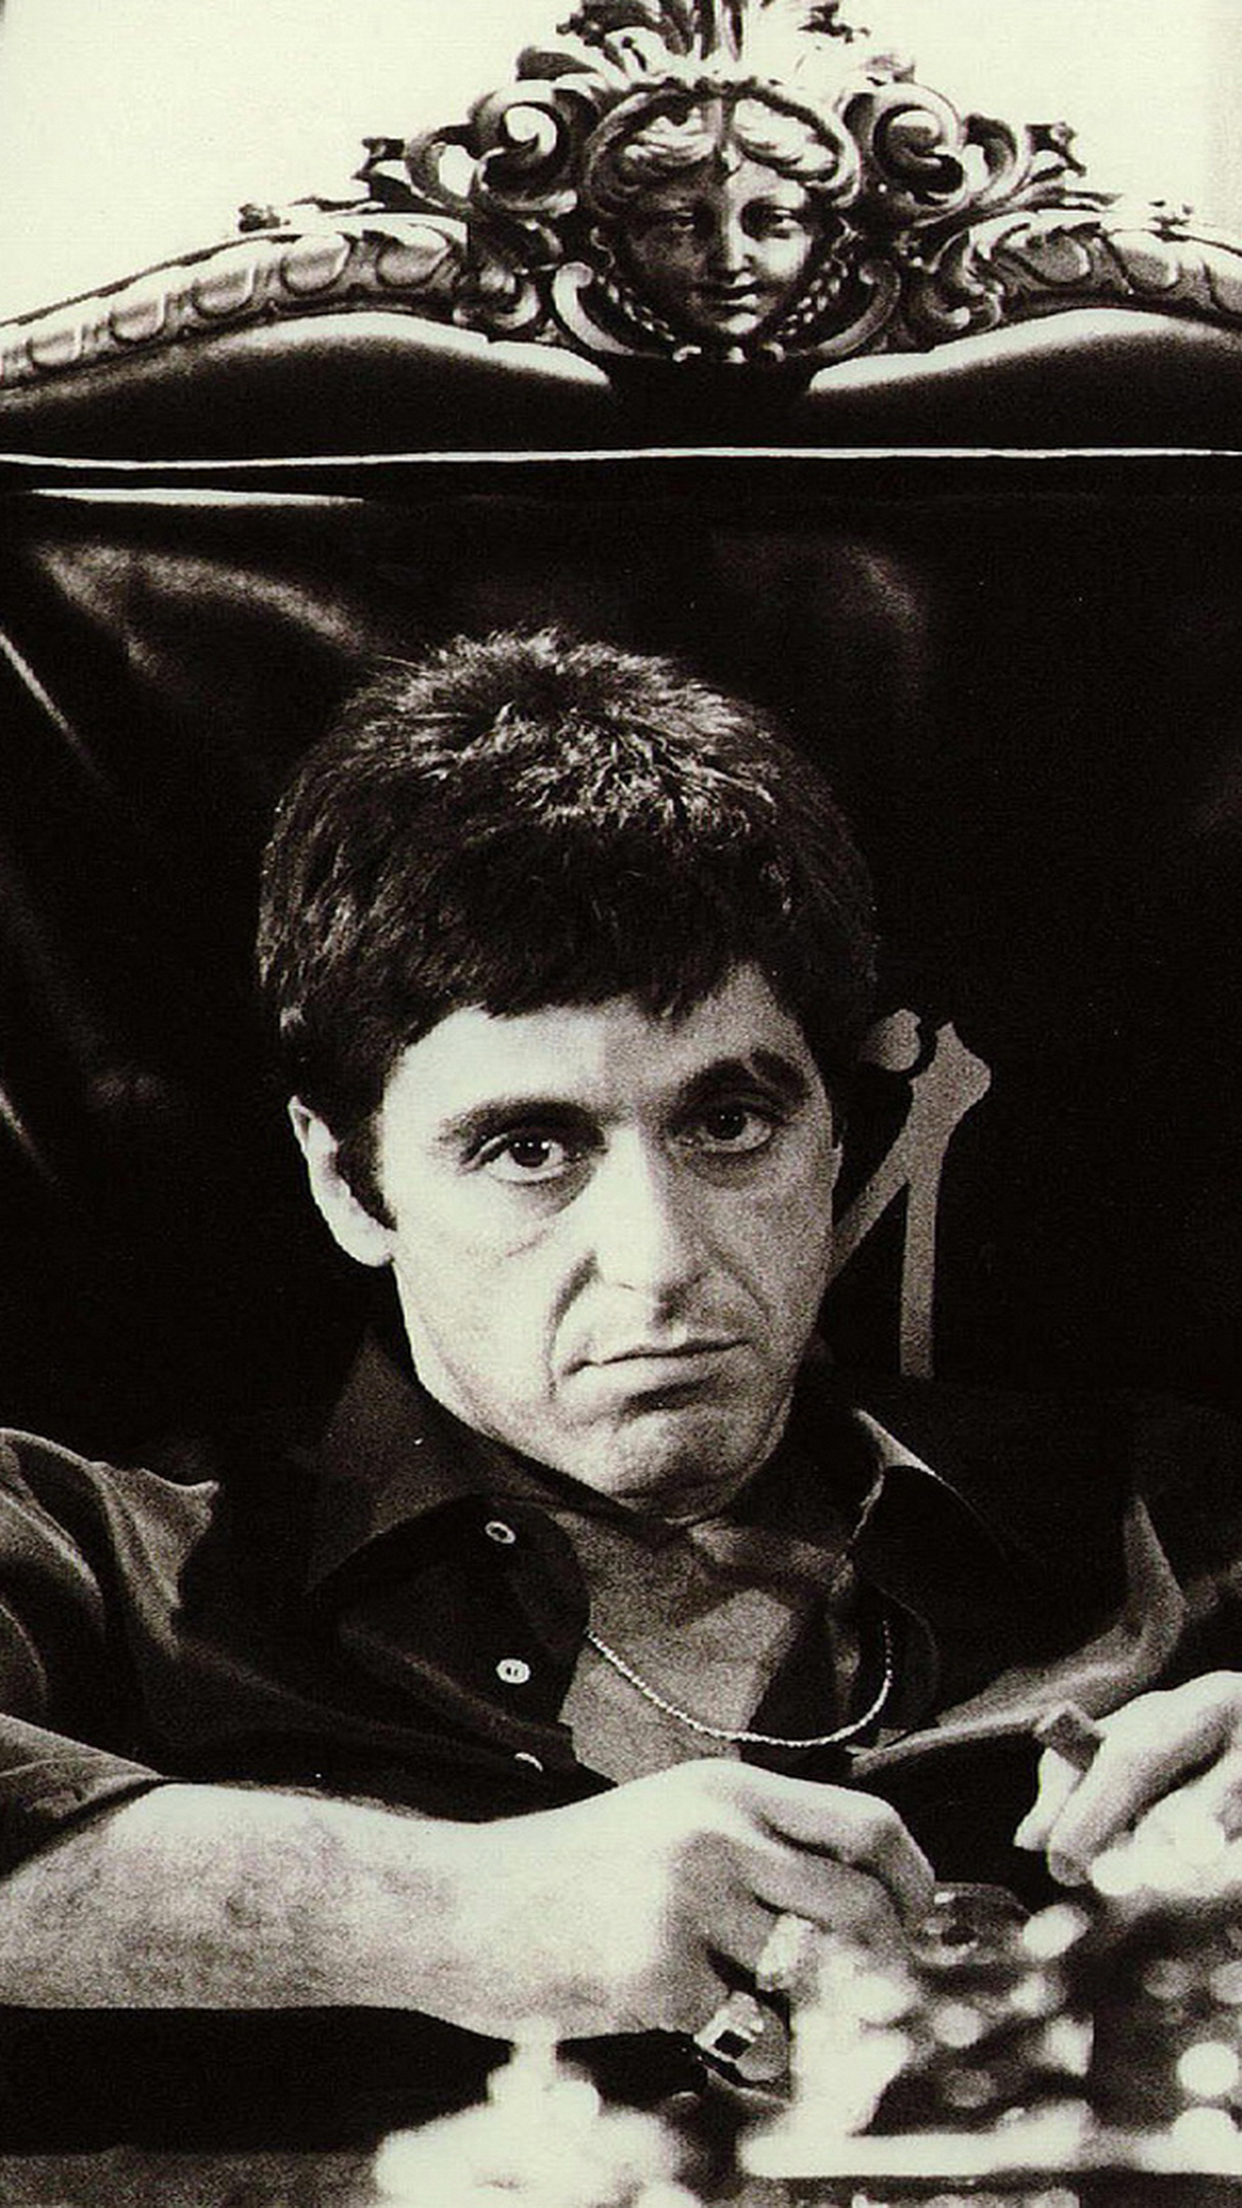 Scarface Wallpaper iPhone